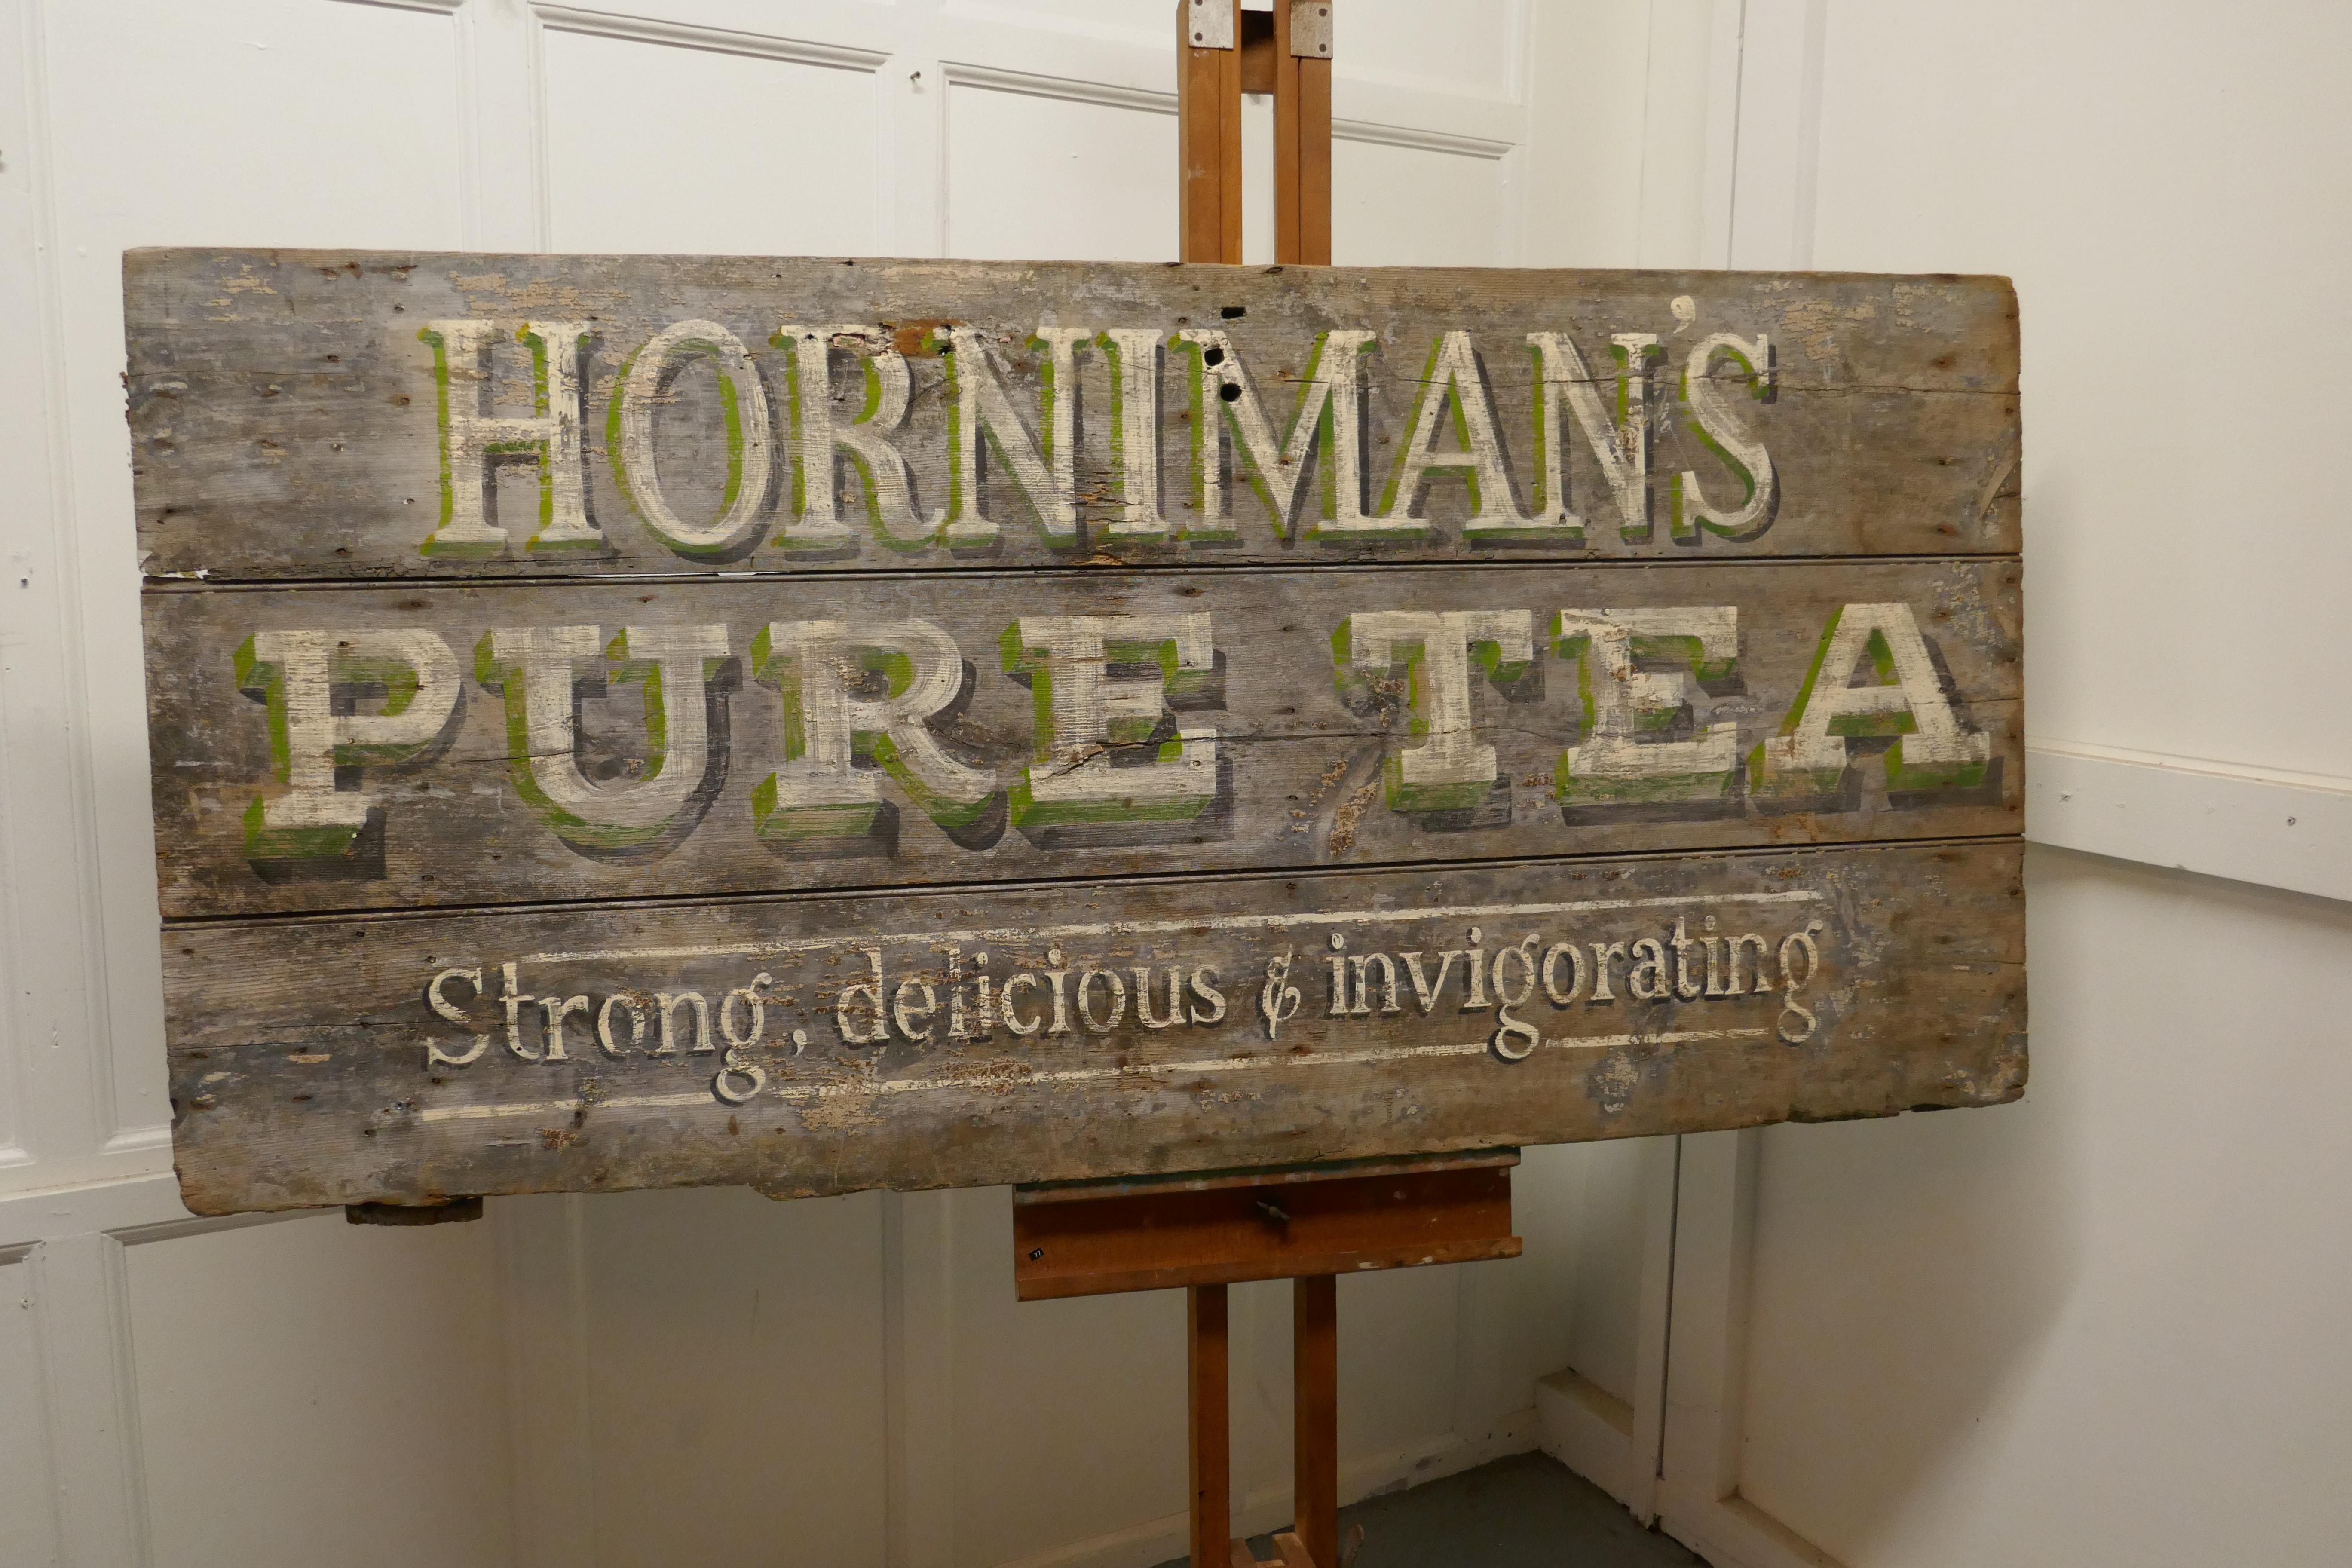 Large painted wooden advertising sign, “HORNIMAN’S PURE TEA”

This is a large painted wooden wall sign
Shabby now but quite readable
It is 31” high and 64” wide
TGB240.